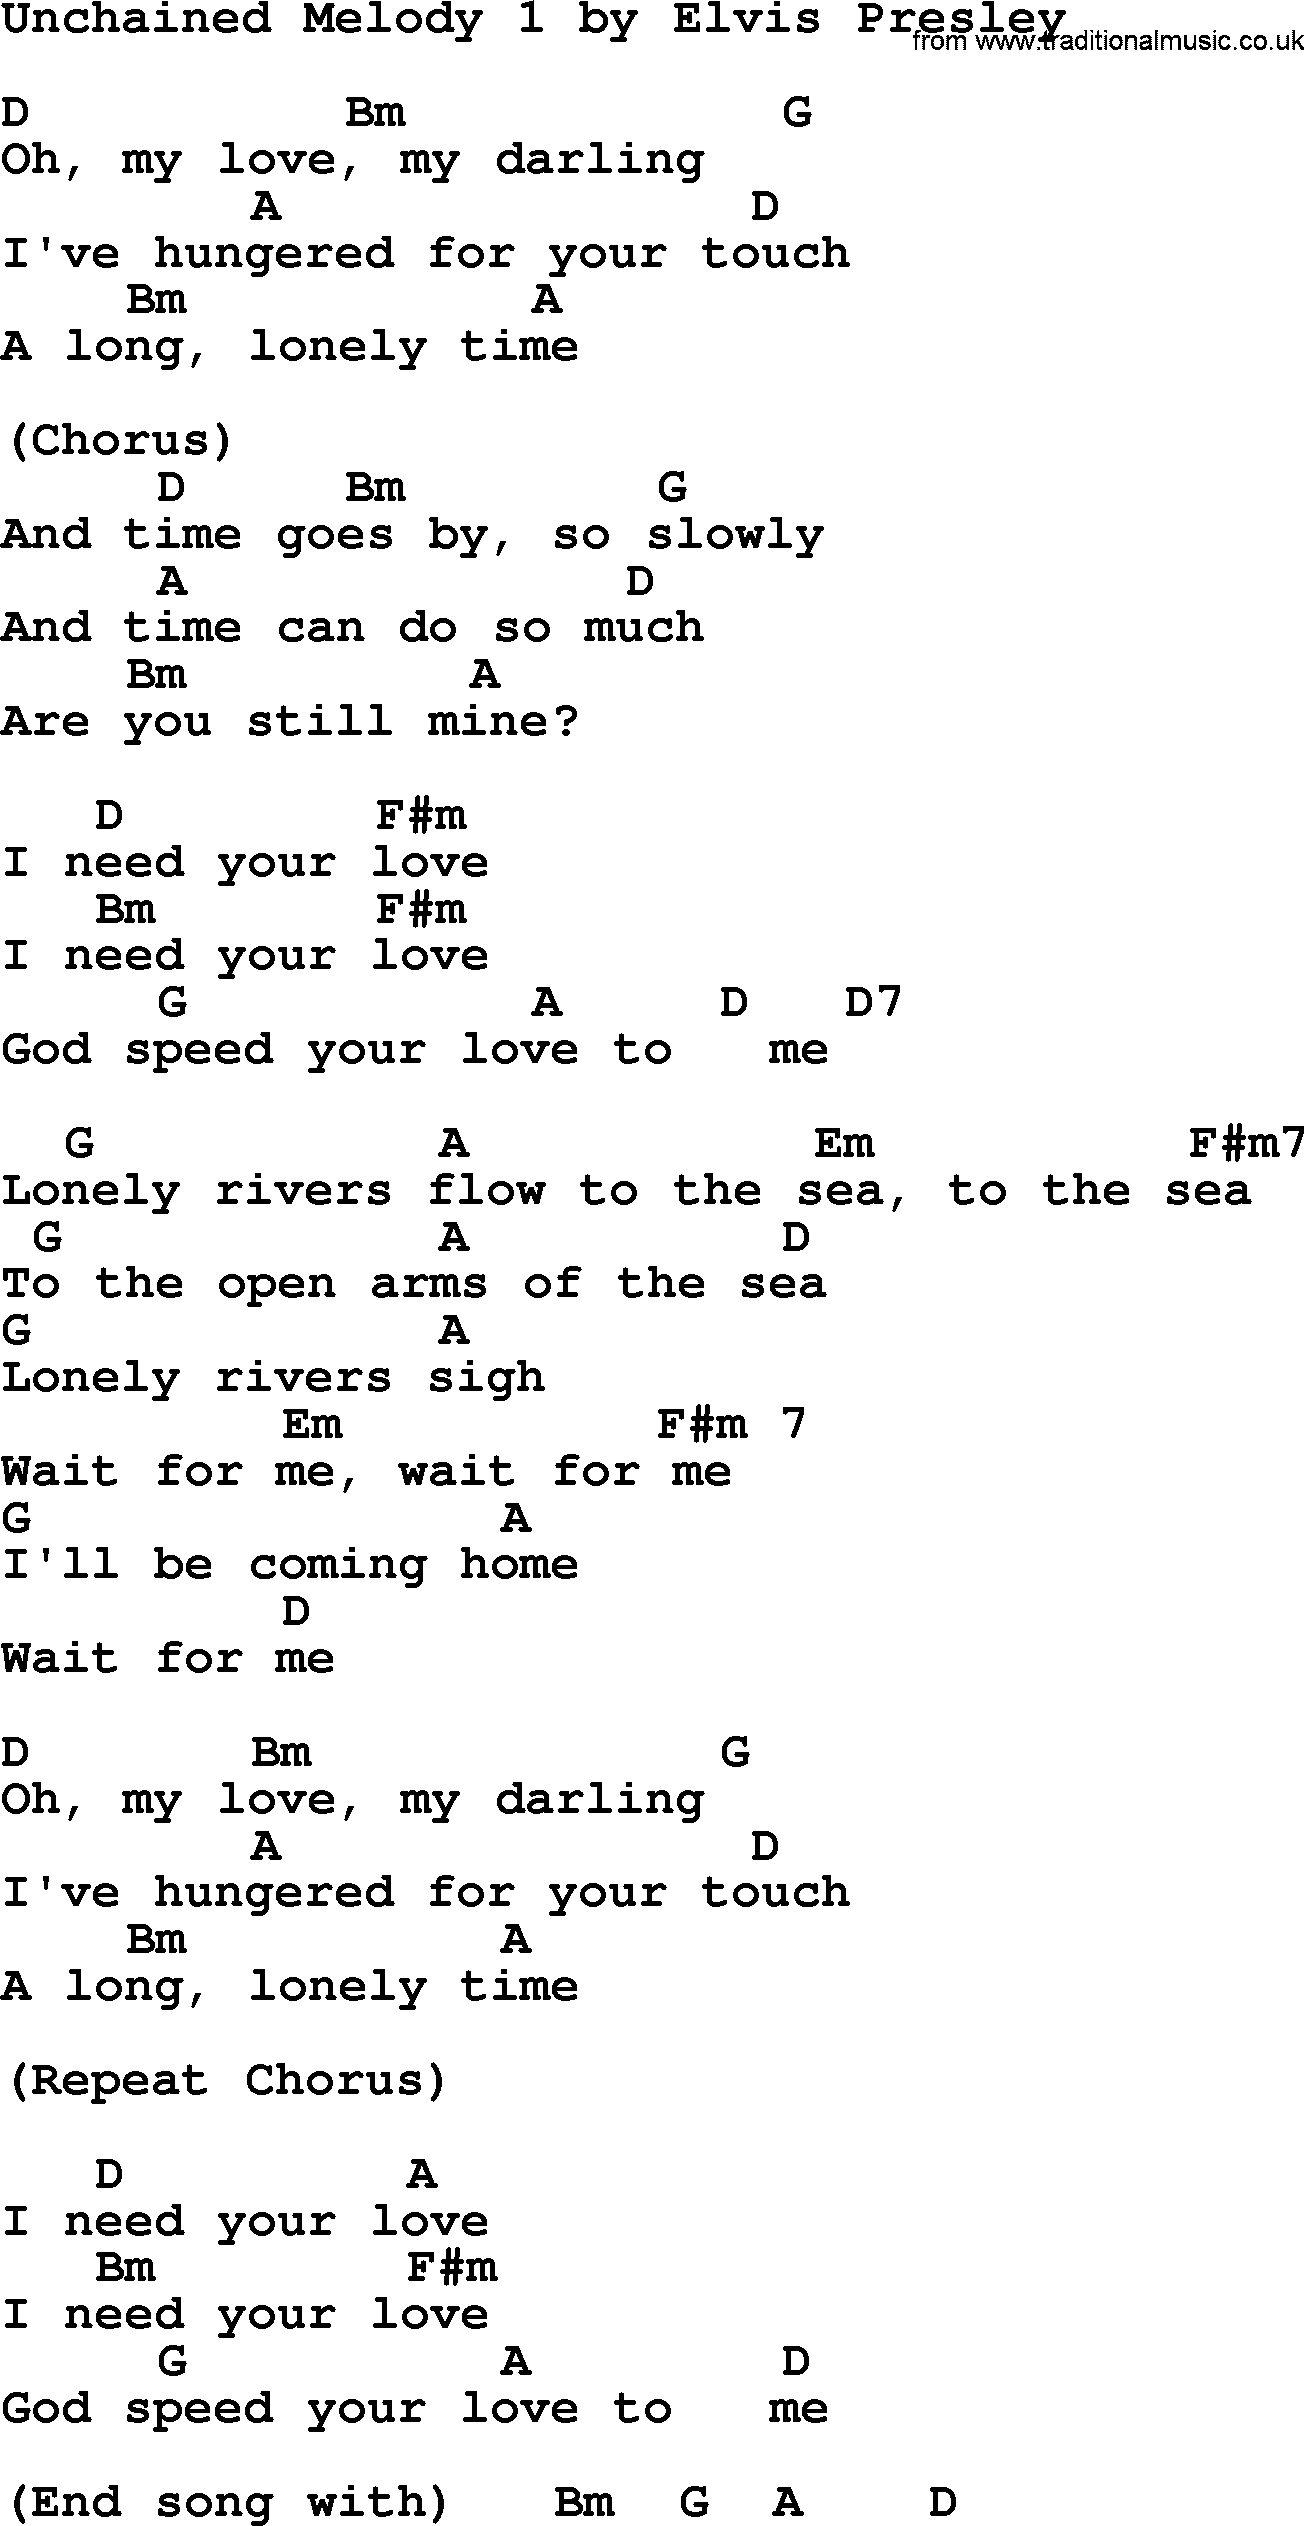 Elvis Presley song: Unchained Melody 1, lyrics and chords